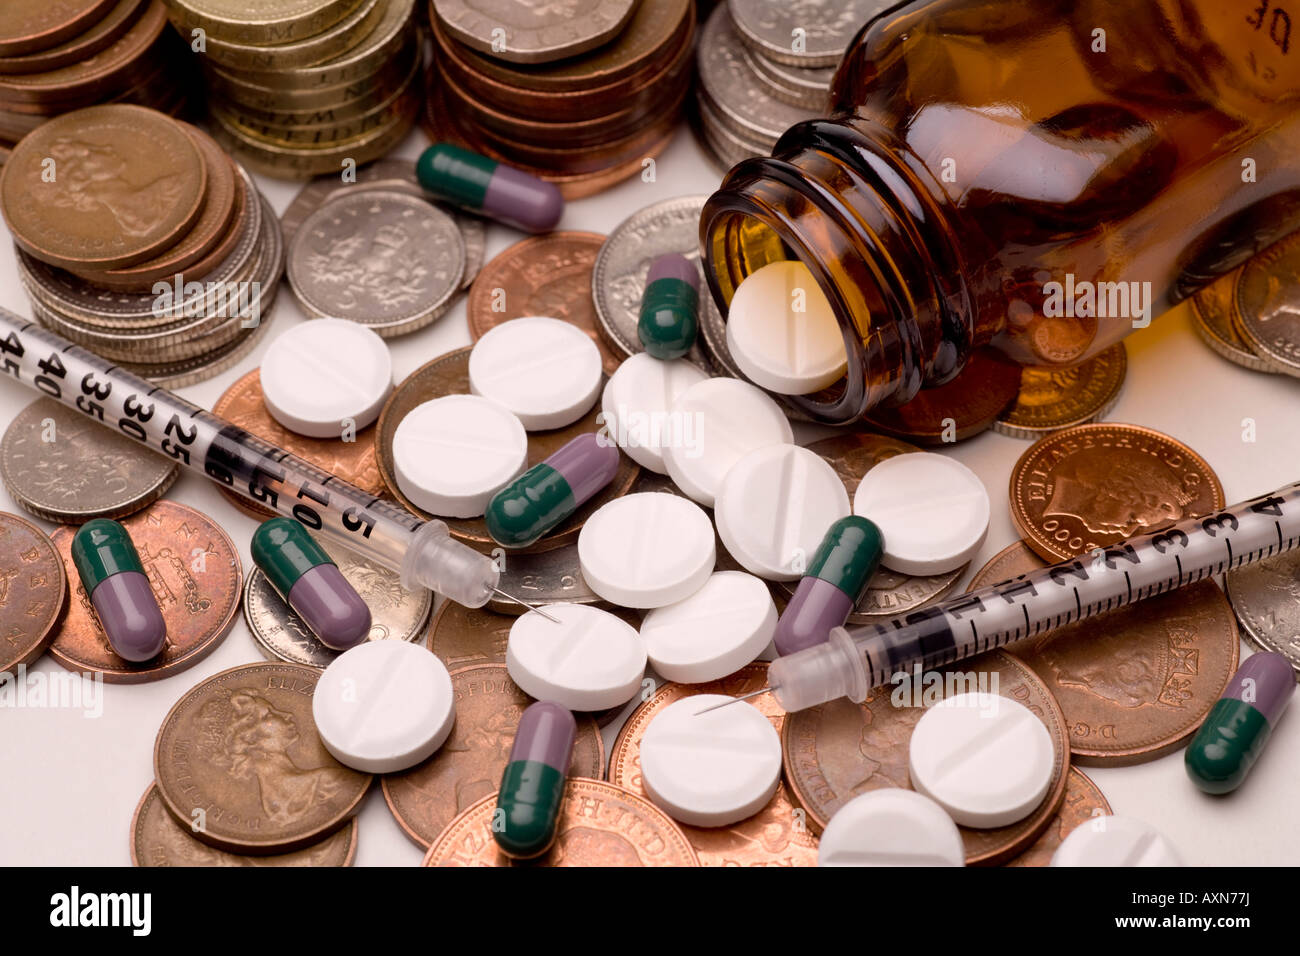 Costs National Health Service medicine prescription charges cash money drugs syringe and brown glass bottle Stock Photo